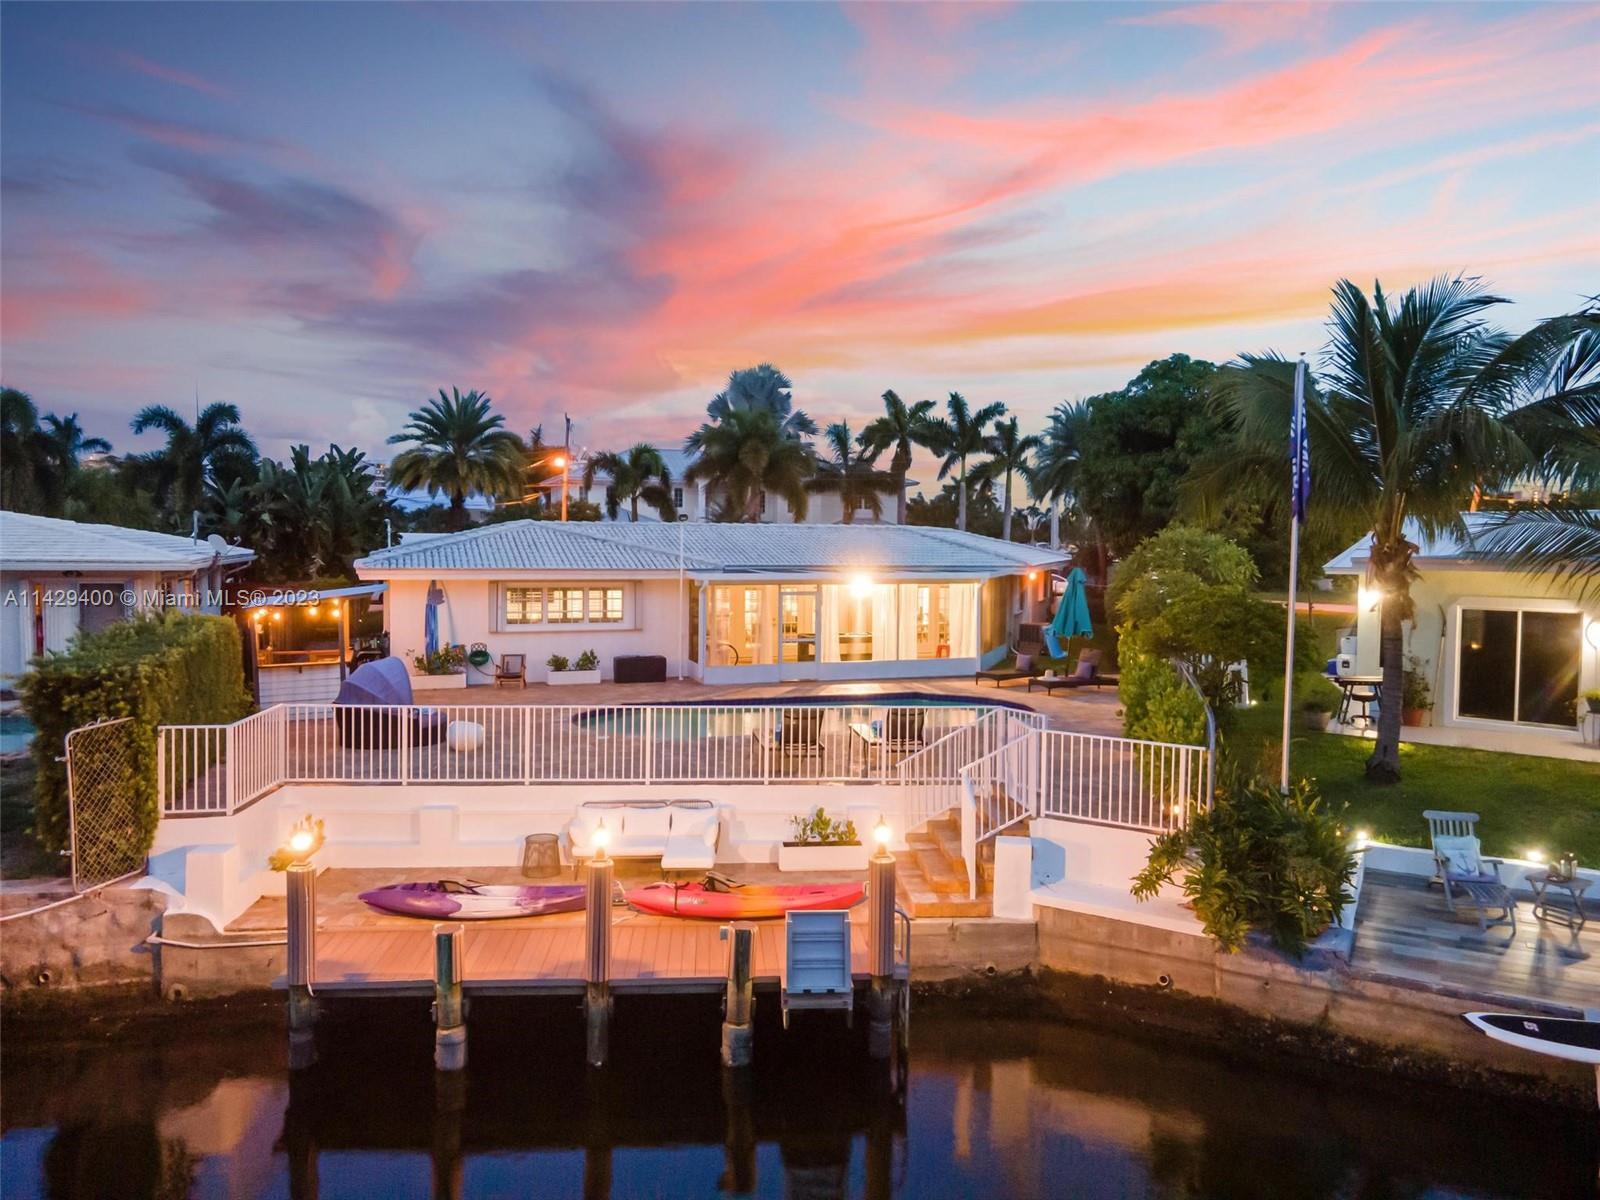 This stunning house offers one story, 3 bedrooms/2 bathrooms, a pool, a dock for boats of up to 35 f